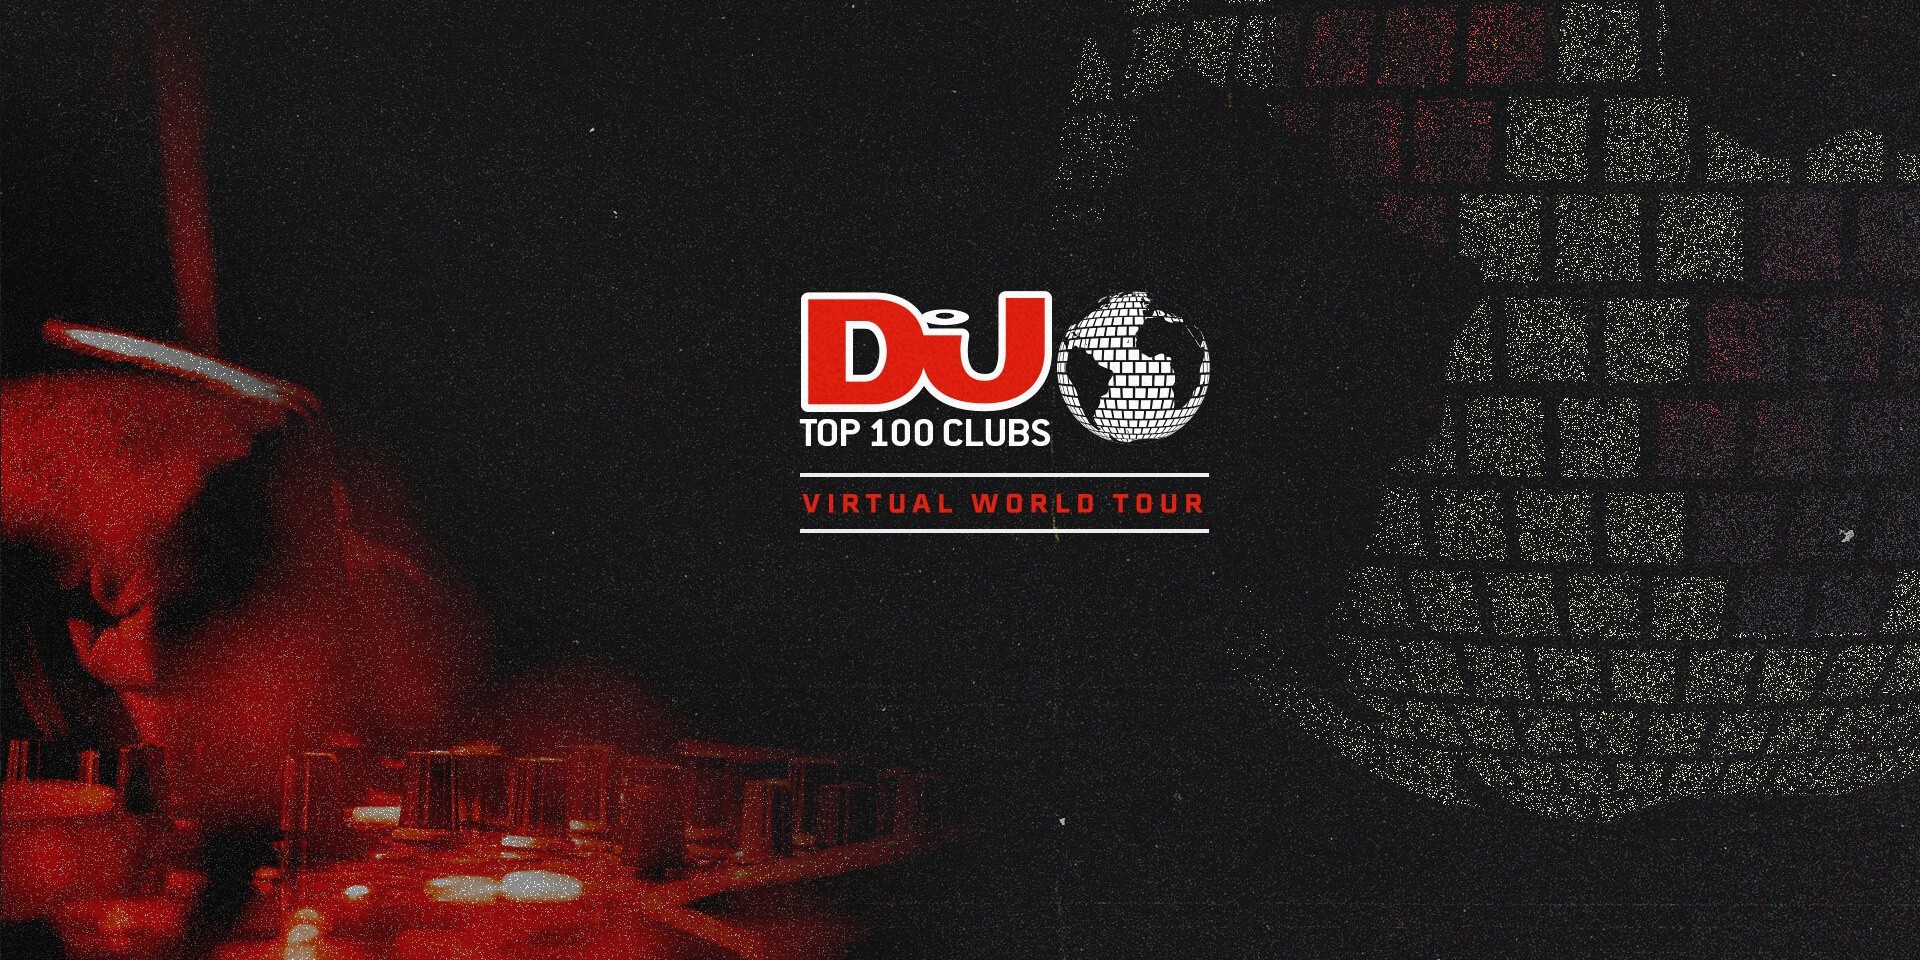 DJ Mag to launch Virtual World Tour alongside Top 100 Clubs poll this May 